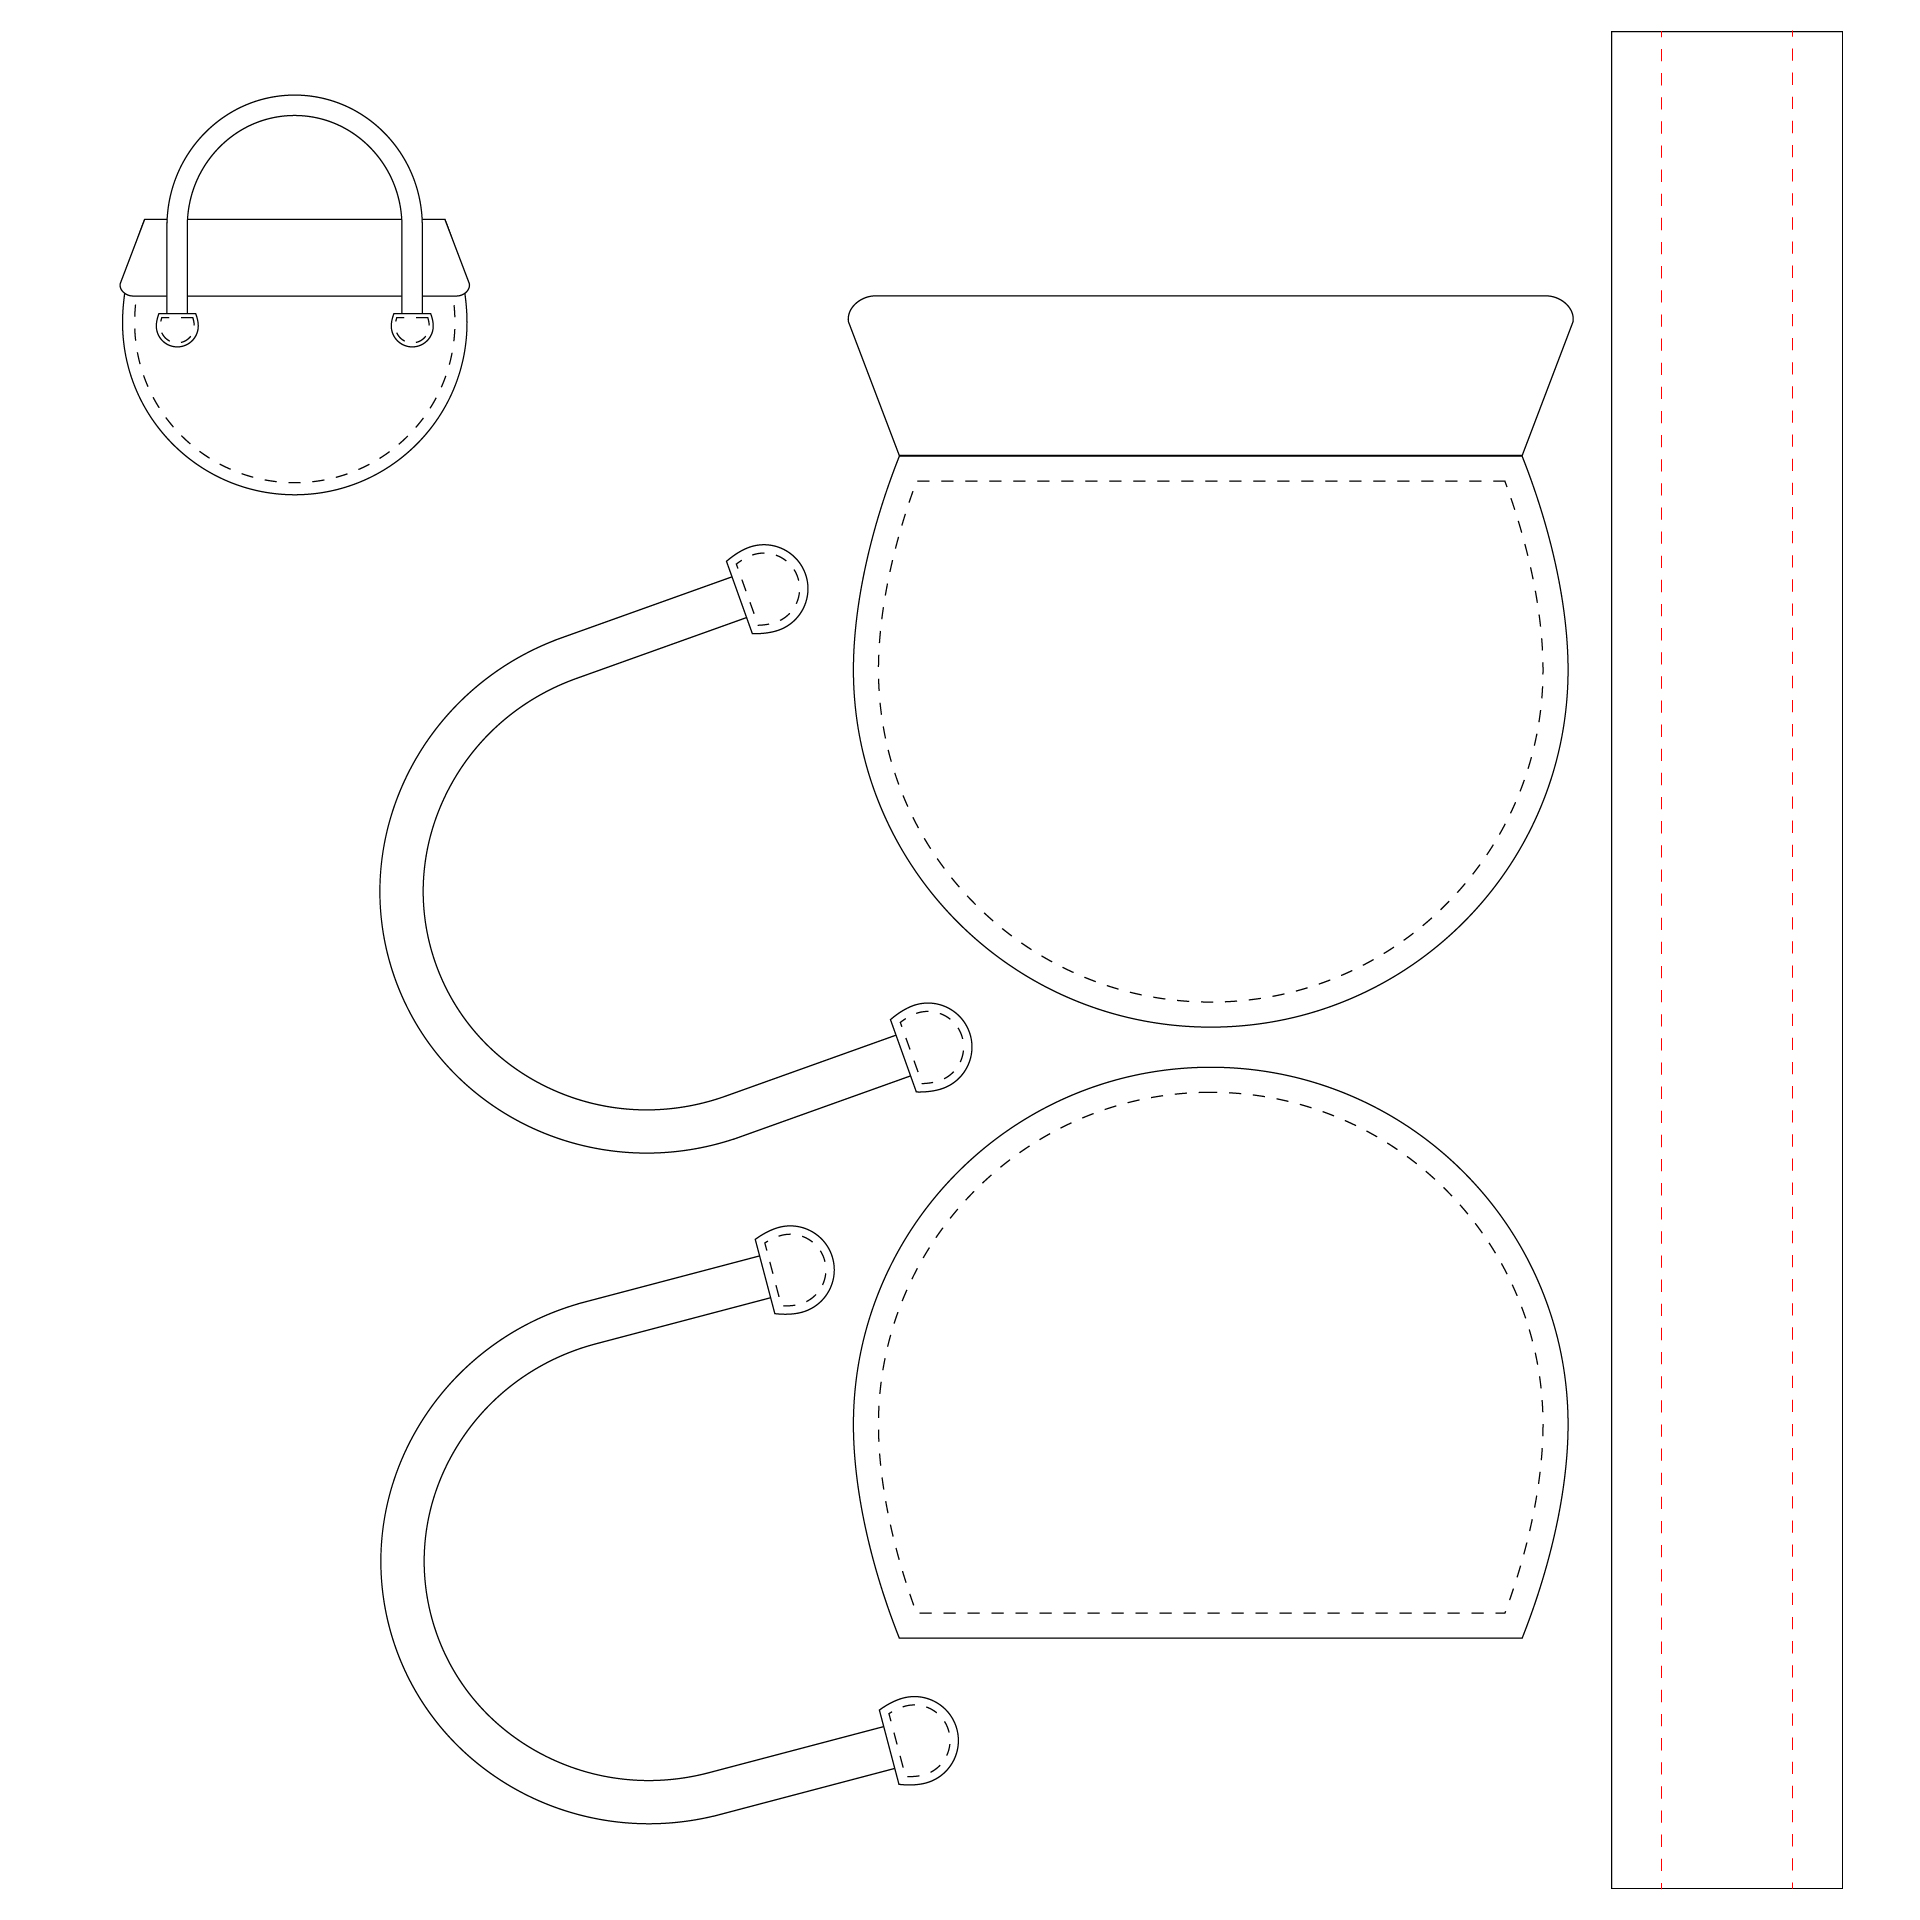 Free Leather Patterns Bags / Leather Tote Bag Pattern Pdf Download